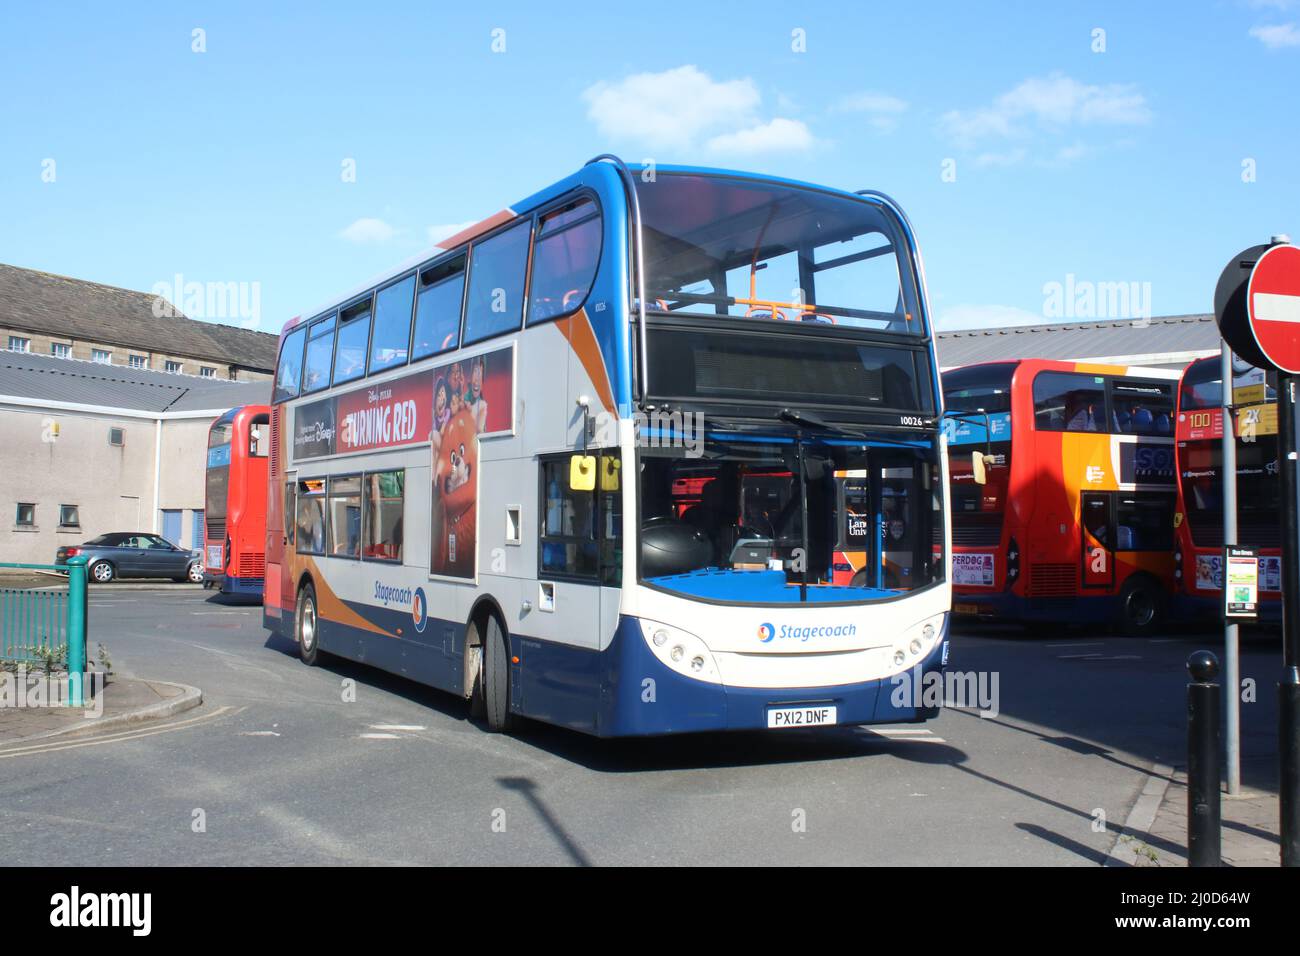 Alexander Dennis Enviro 400 double deck bus in Stagecoach old livery, operated by Stagecoach leaving Lancaster bus station on 18th March 2022. Stock Photo